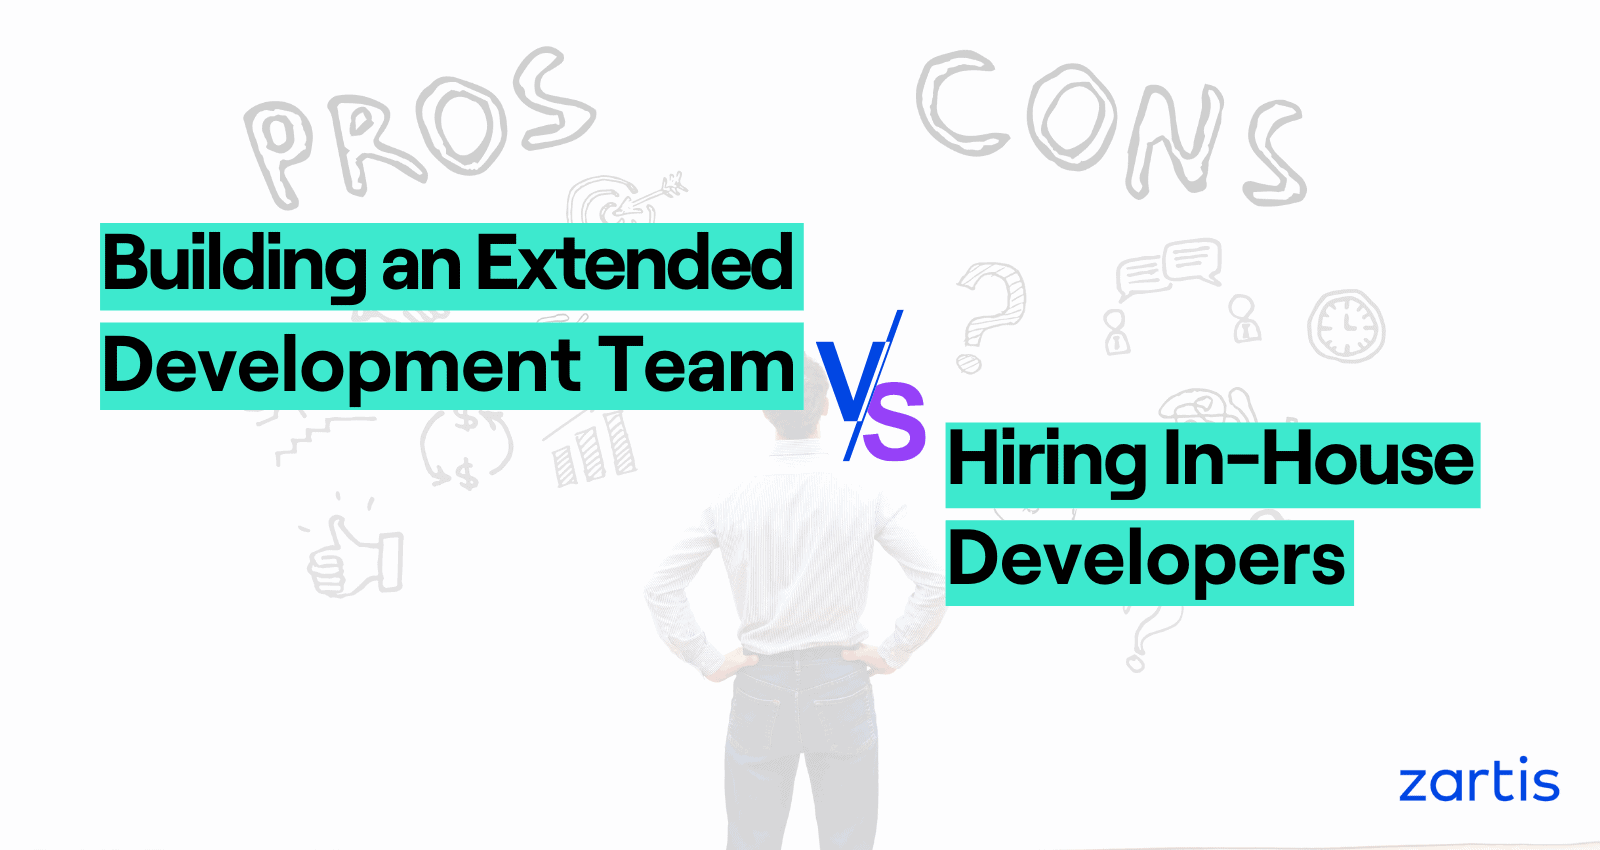 pros and cons of hiring an extended development team